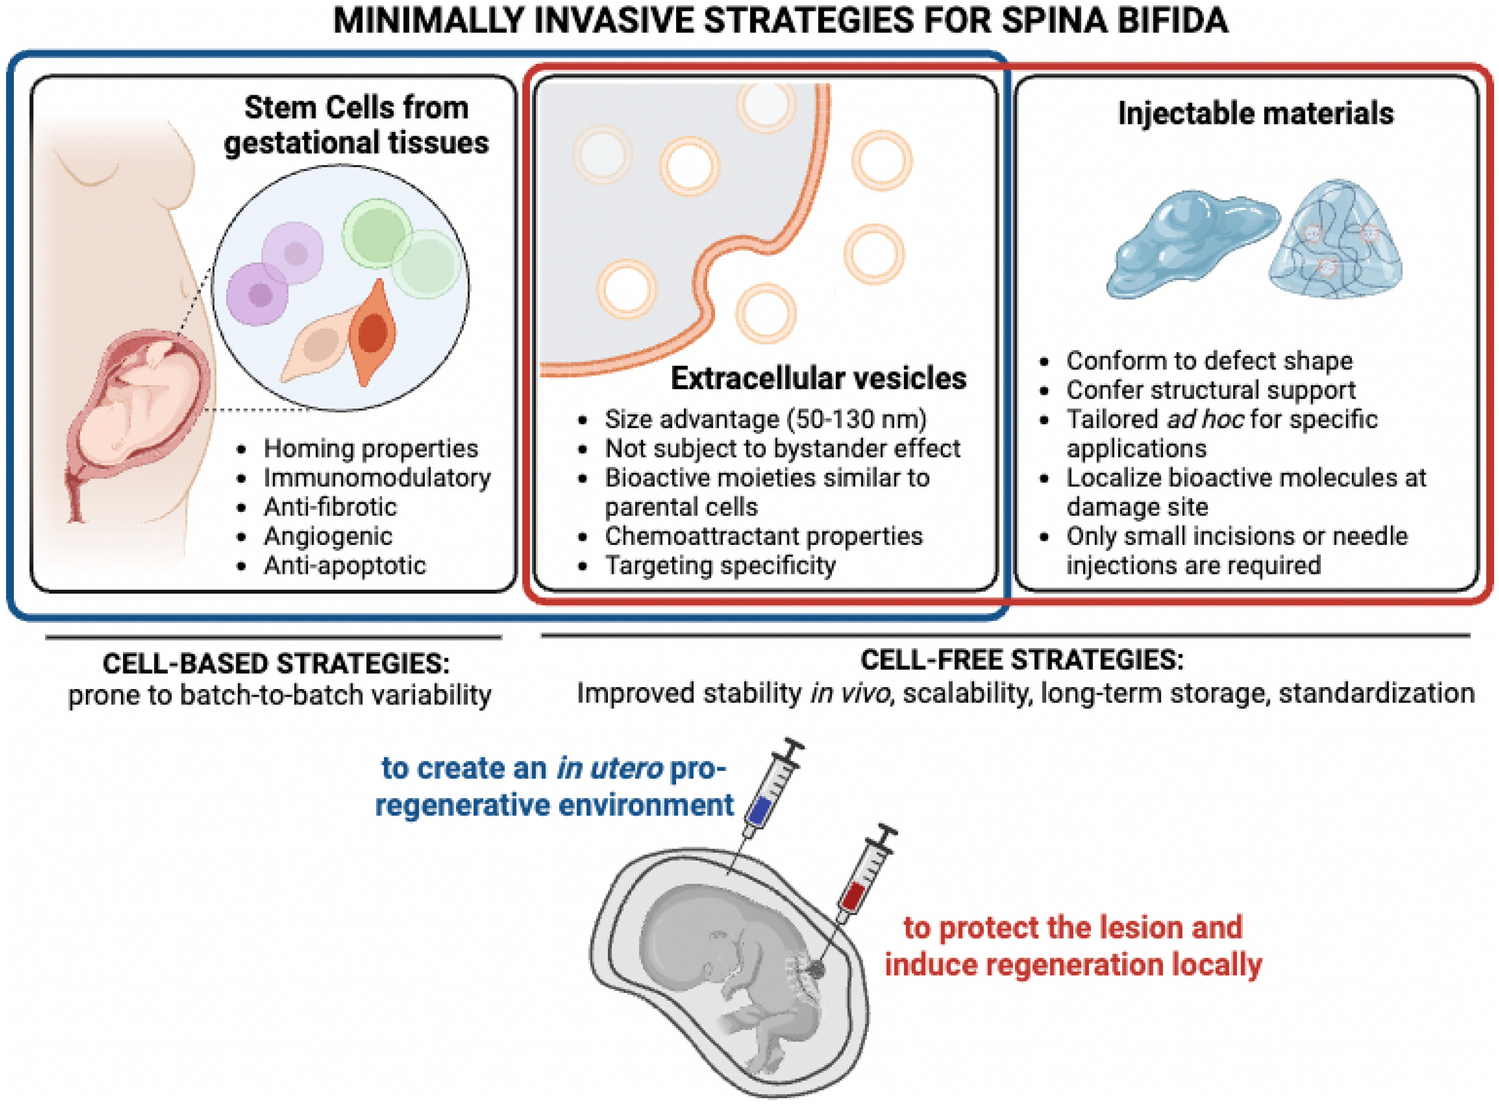 Stem Cell-Based Strategies for Prenatal Treatment of Spina Bifida and the Promise of Cell-Free, Minimally Invasive Approaches